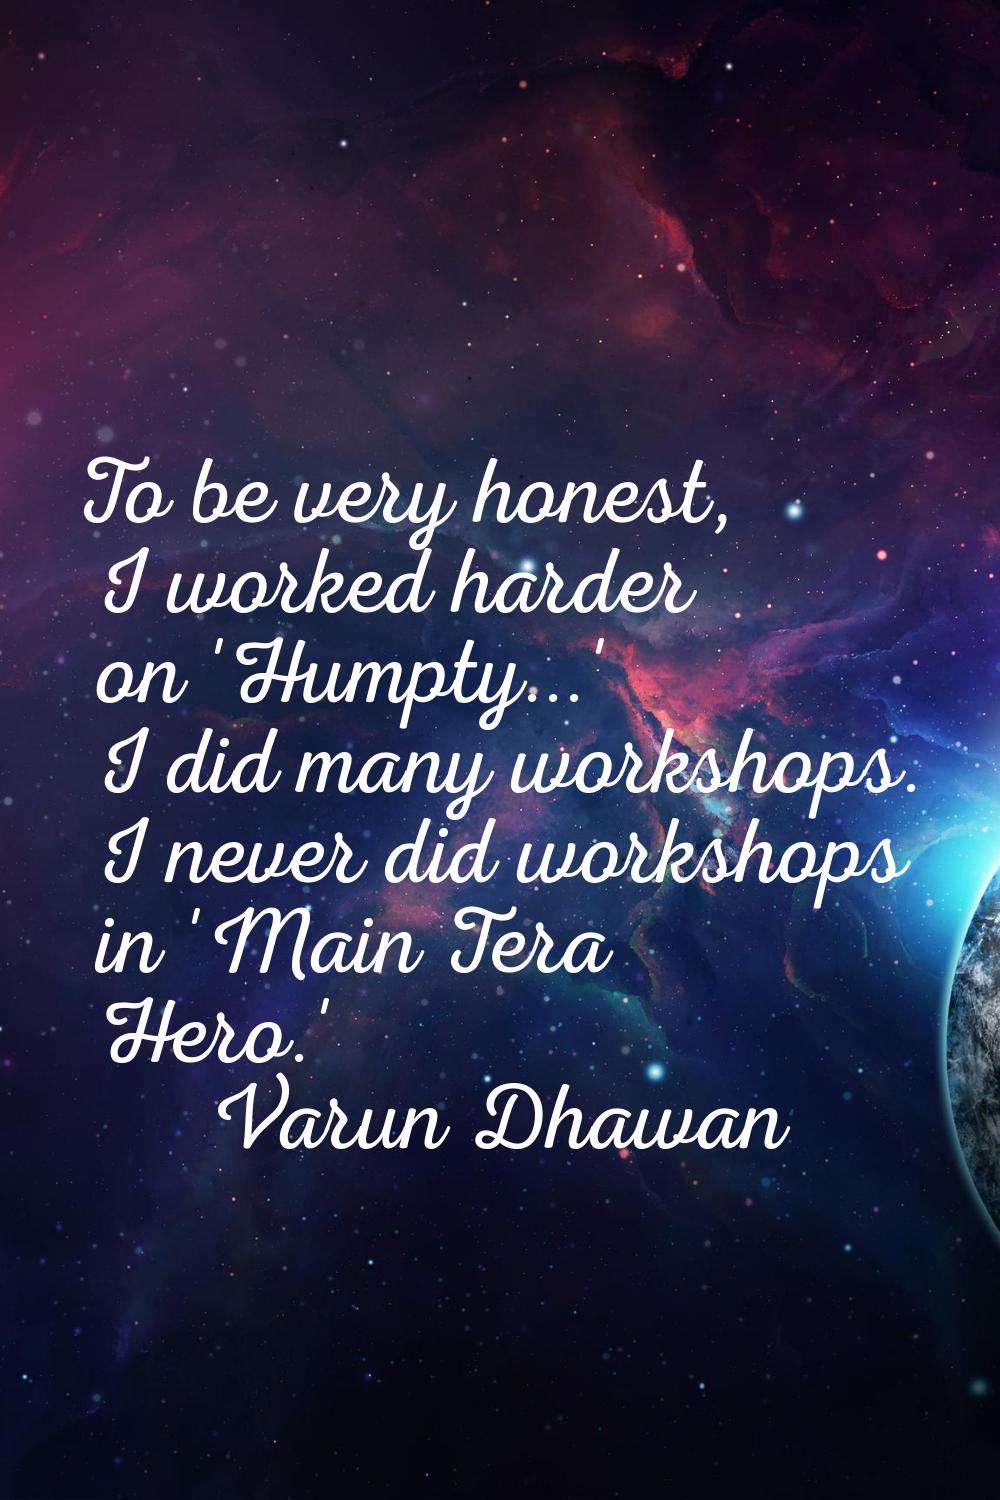 To be very honest, I worked harder on 'Humpty...' I did many workshops. I never did workshops in 'M